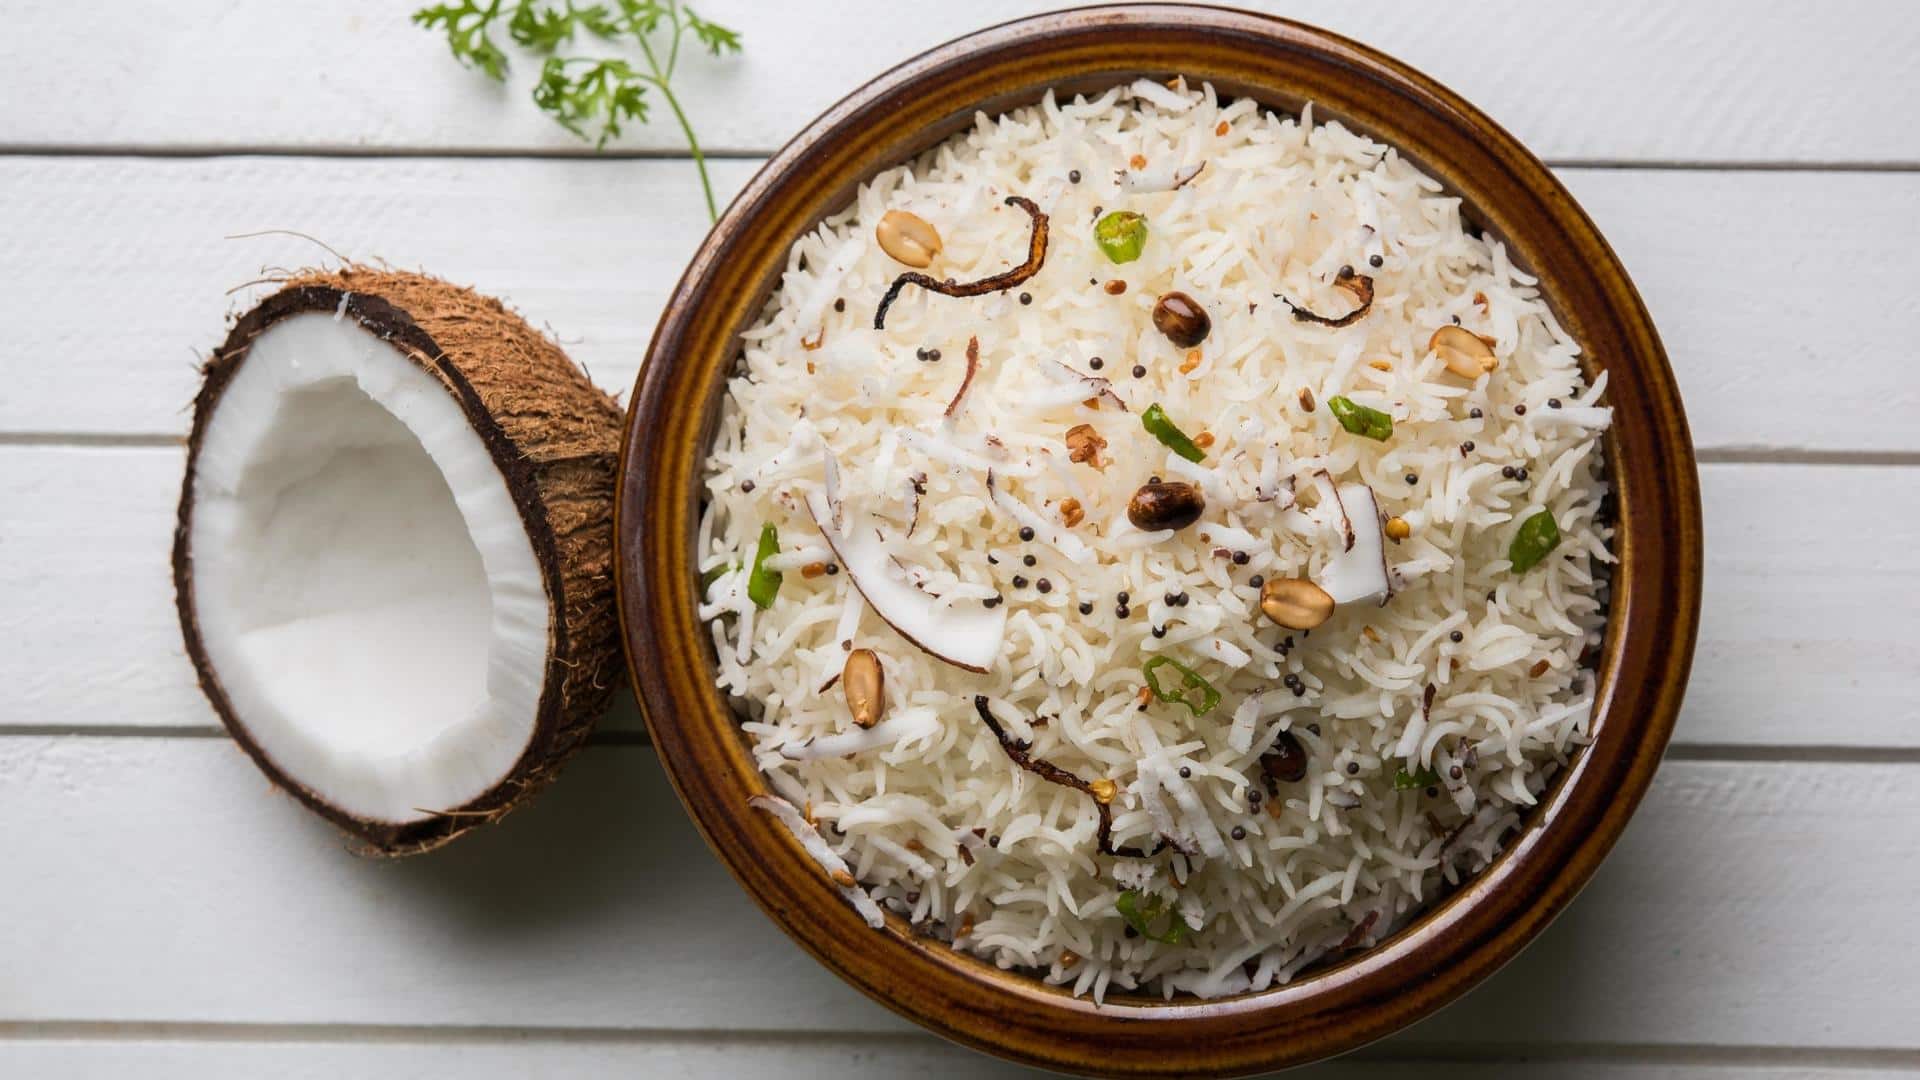 'Rice' in celebration this Pongal with these flavorsome recipes